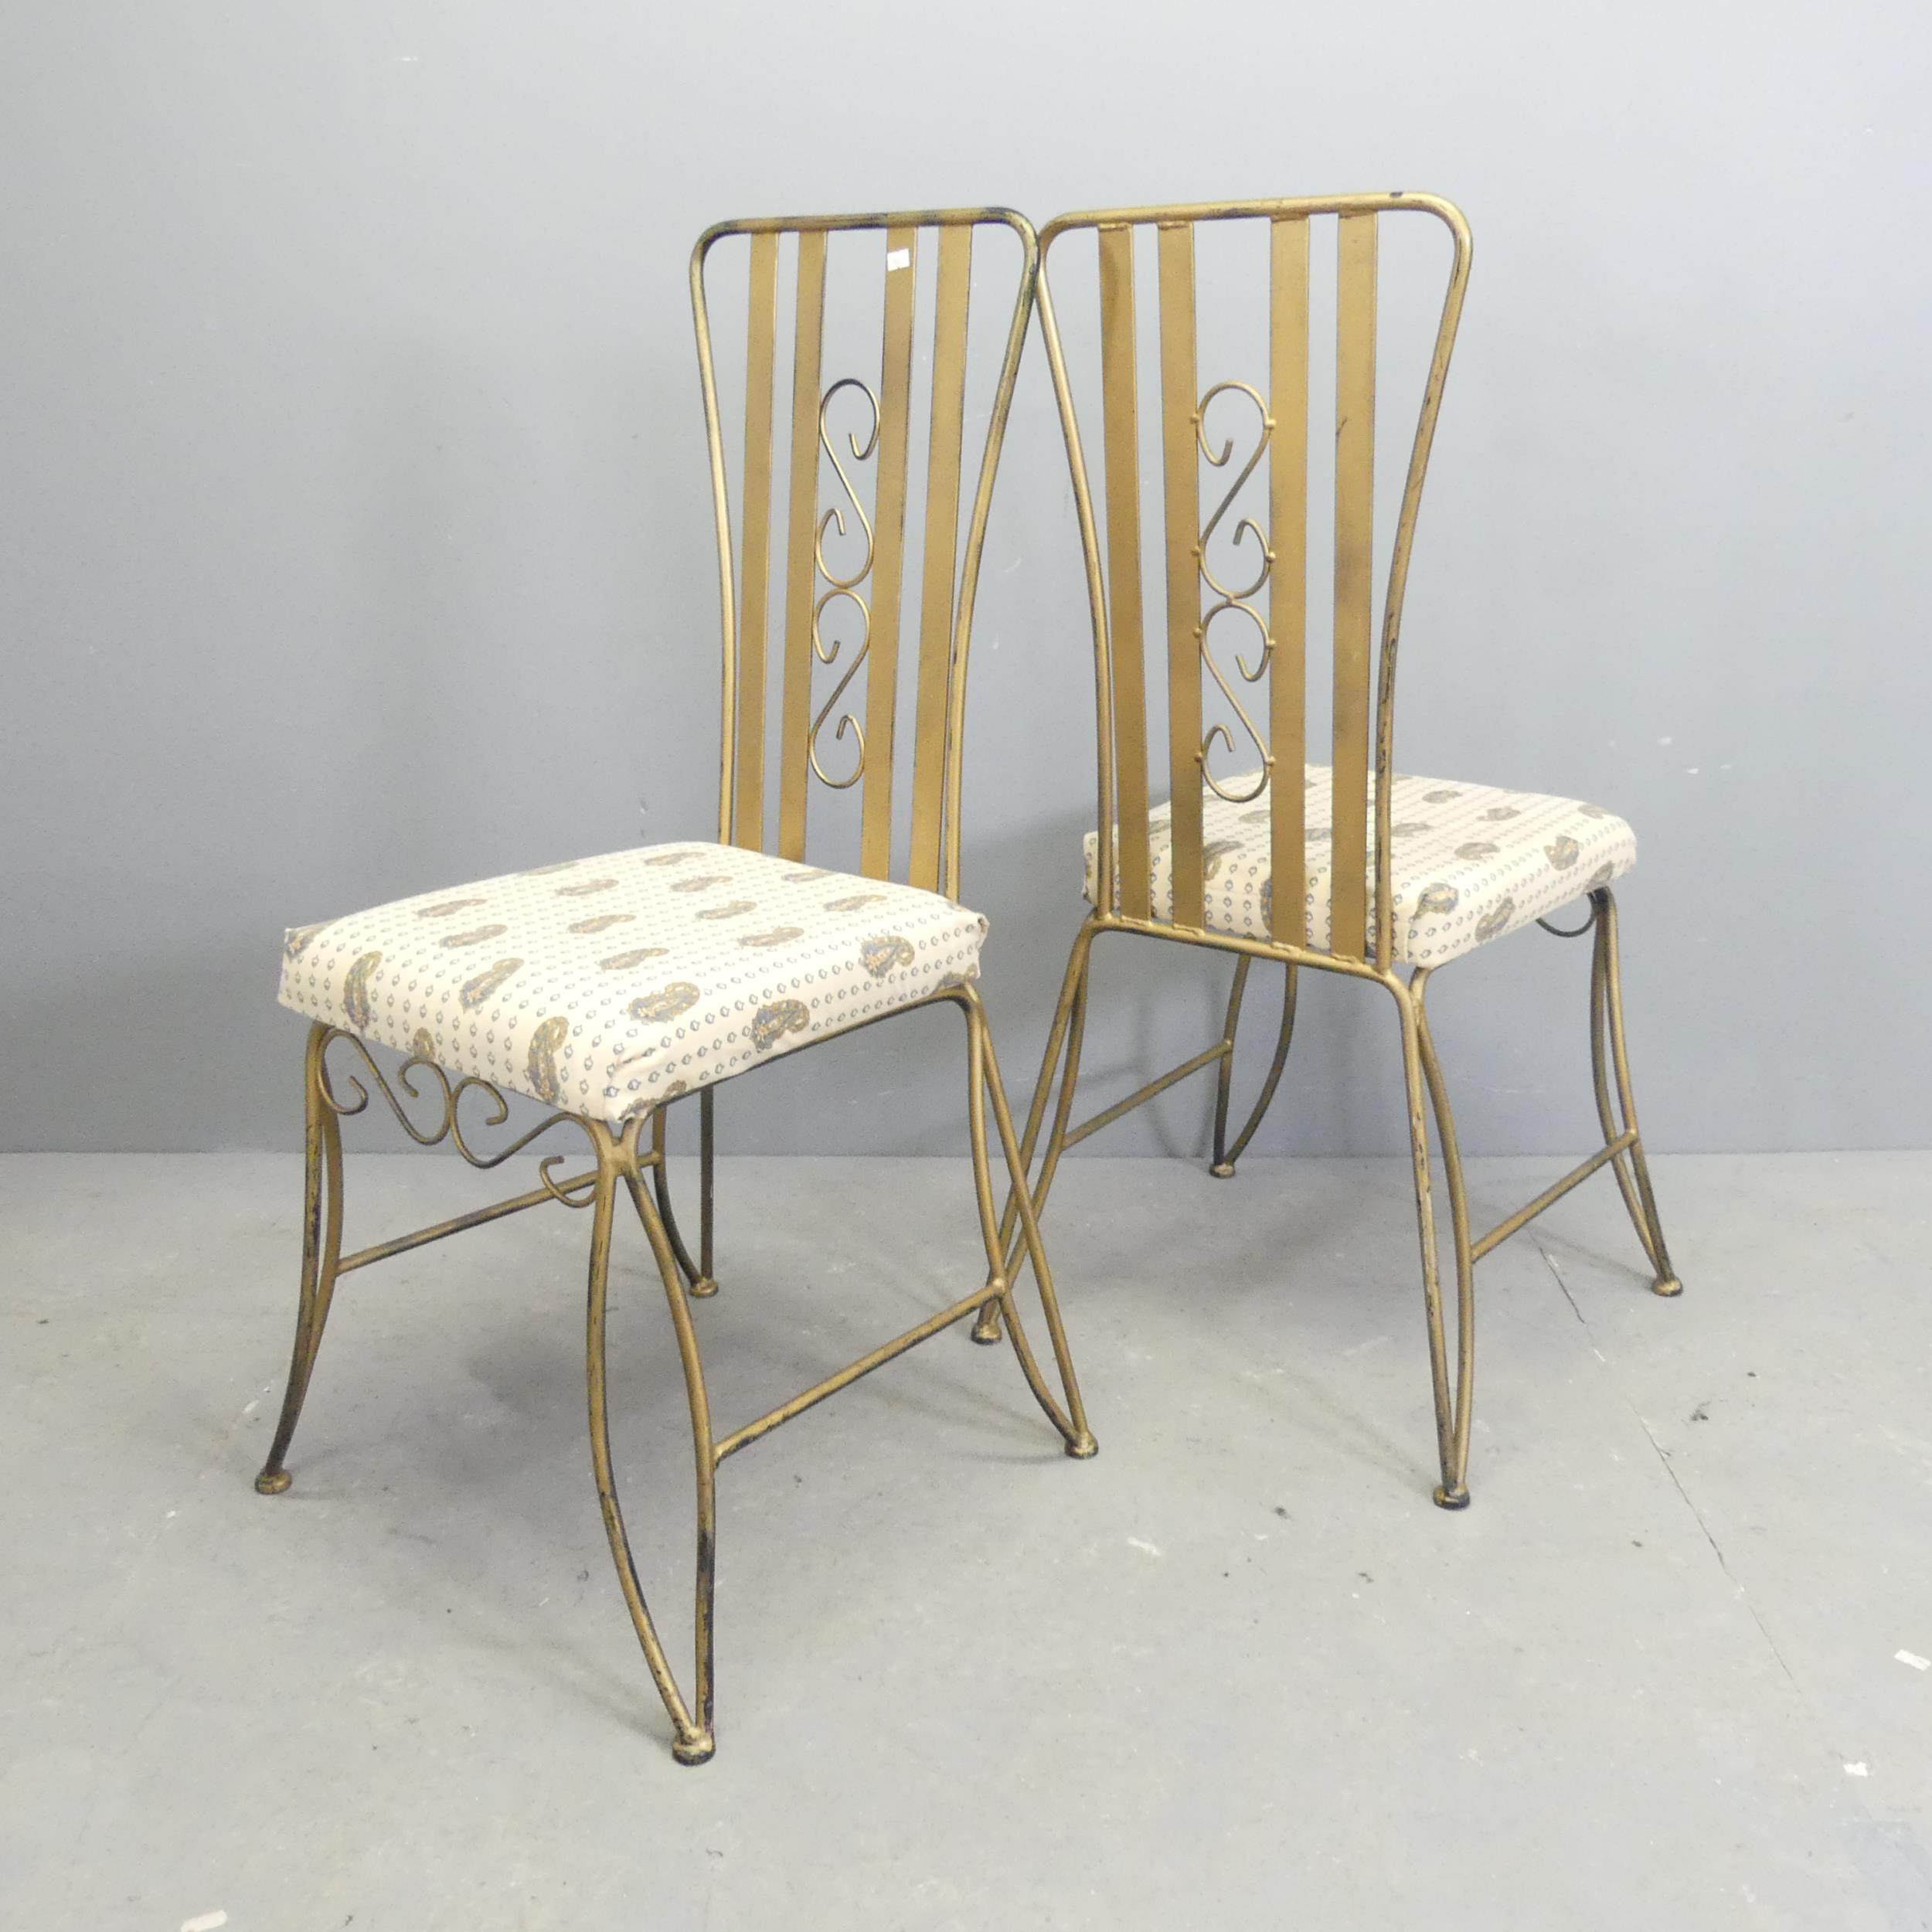 A set of four painted wrought metal garden chairs with upholstered seats. - Image 2 of 2